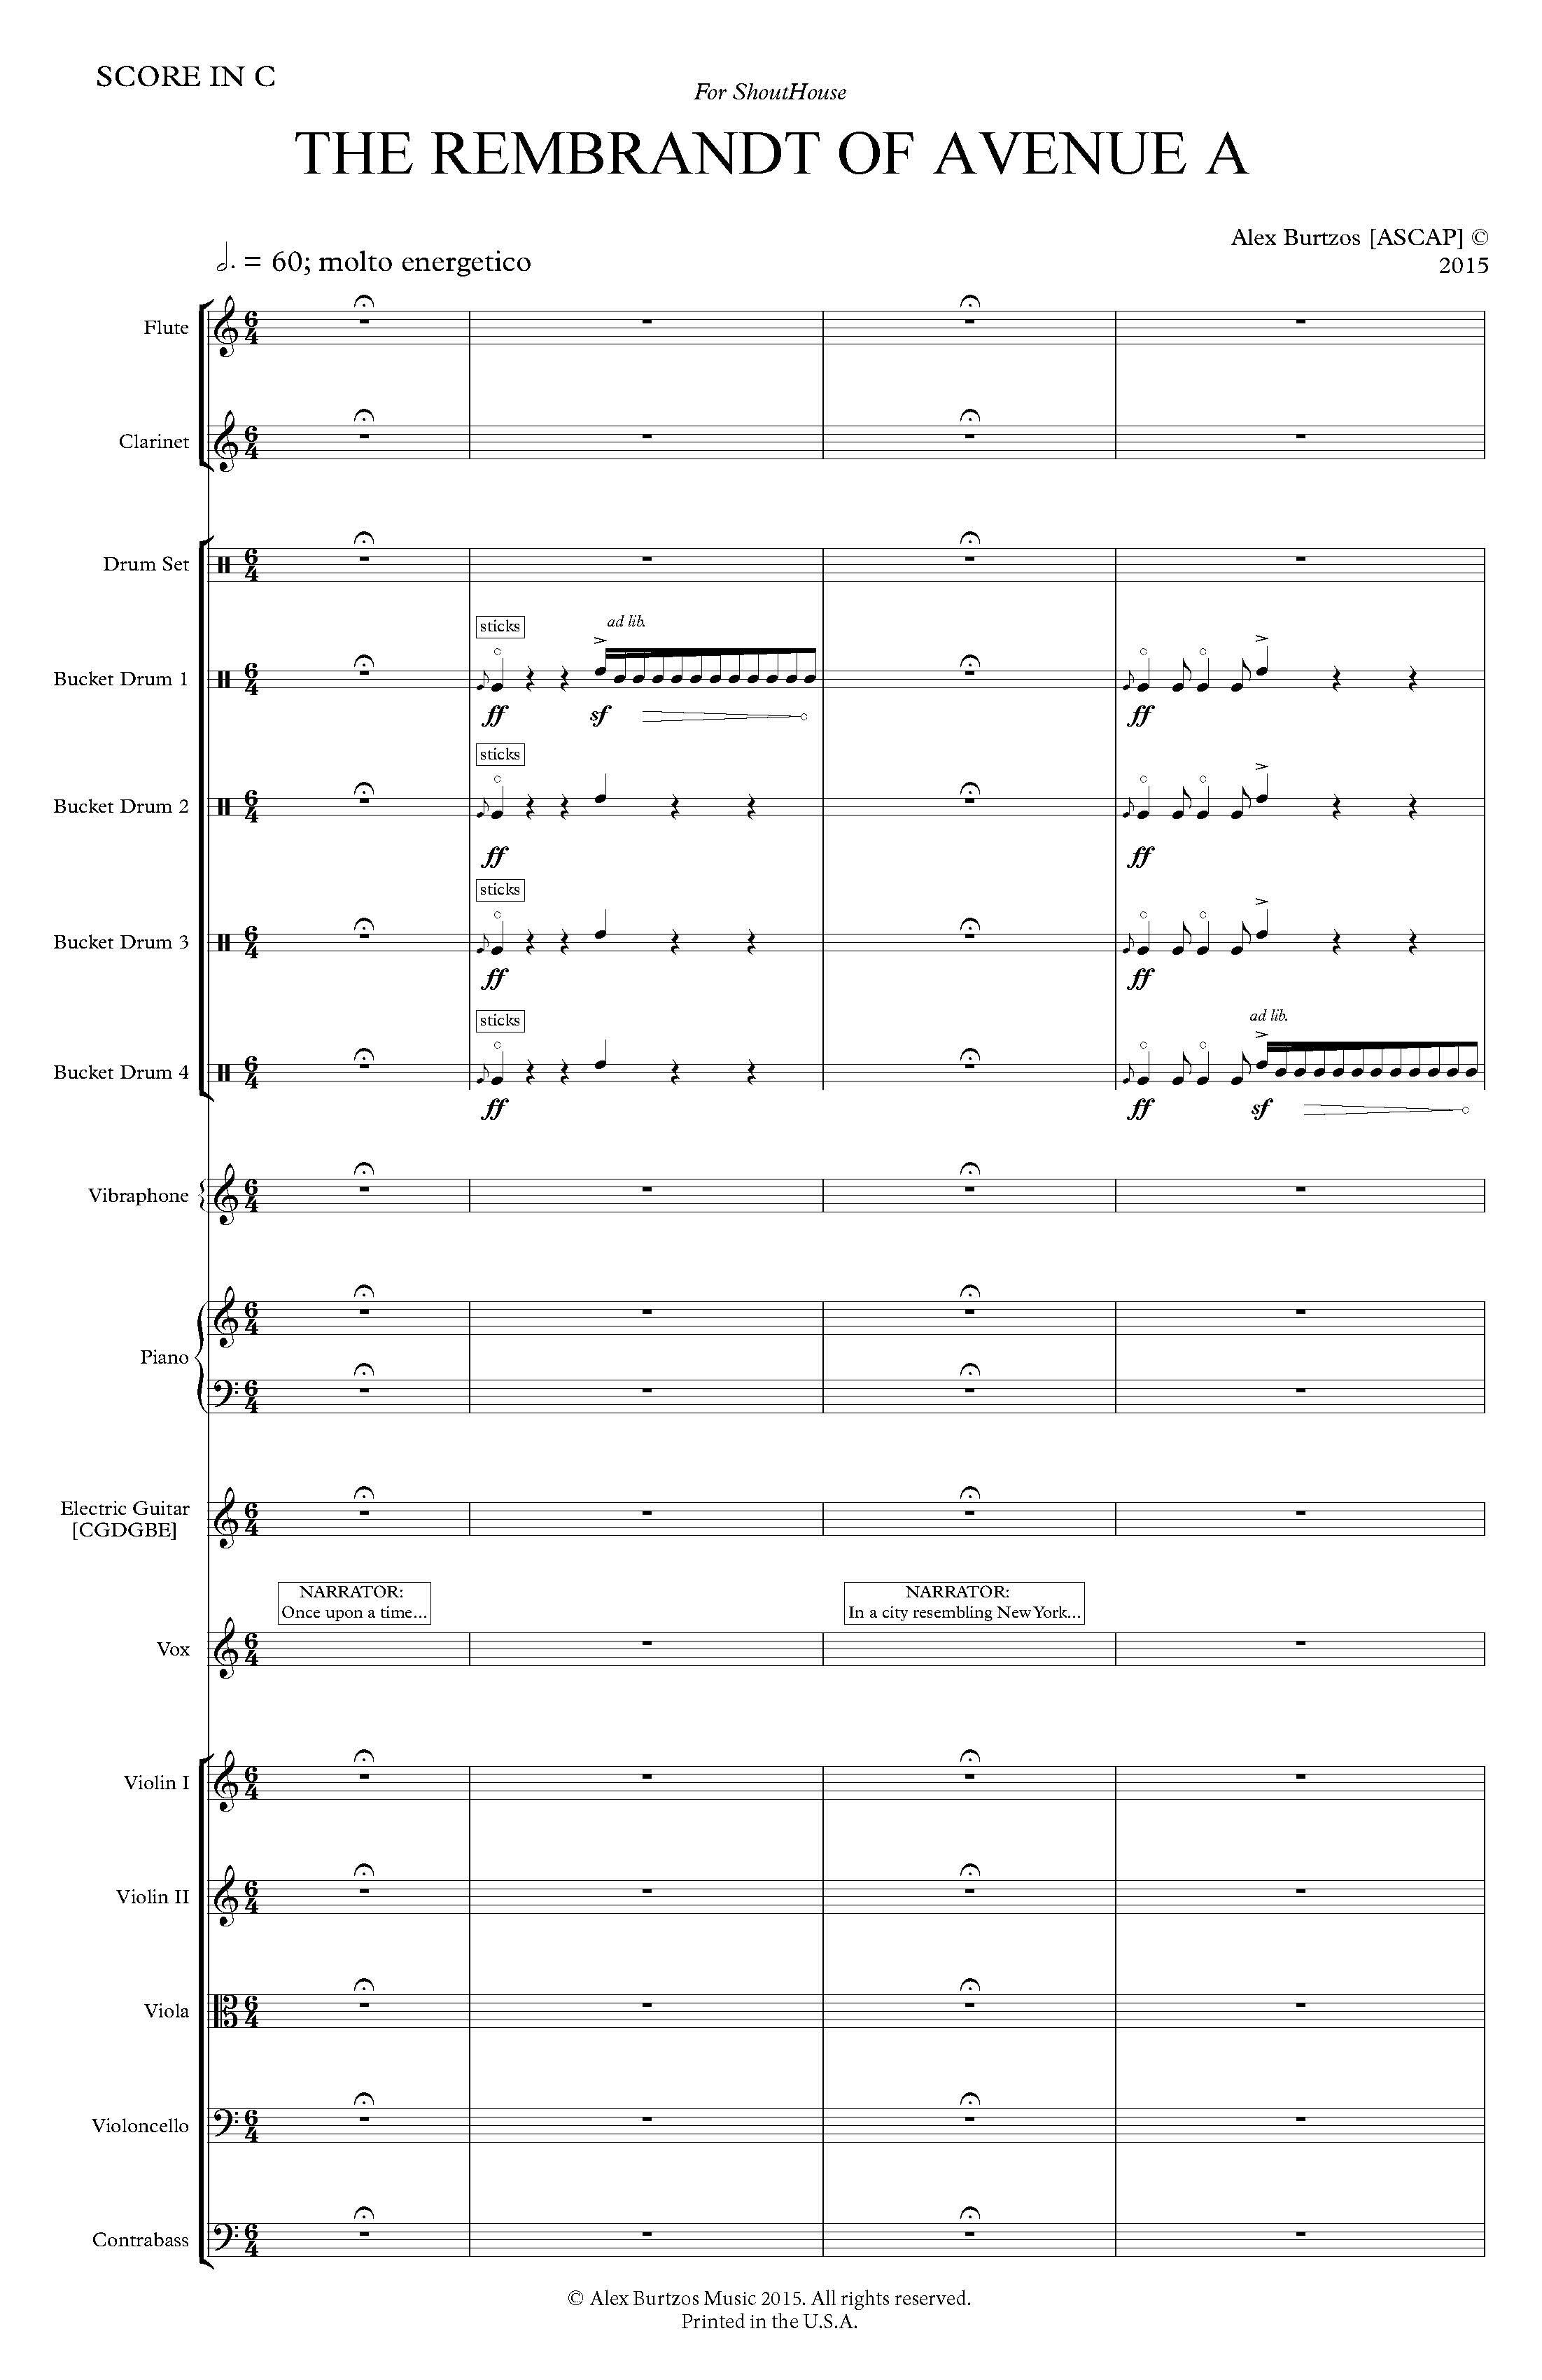 The Rembrandt of Avenue A - Complete Score_Page_07.jpg